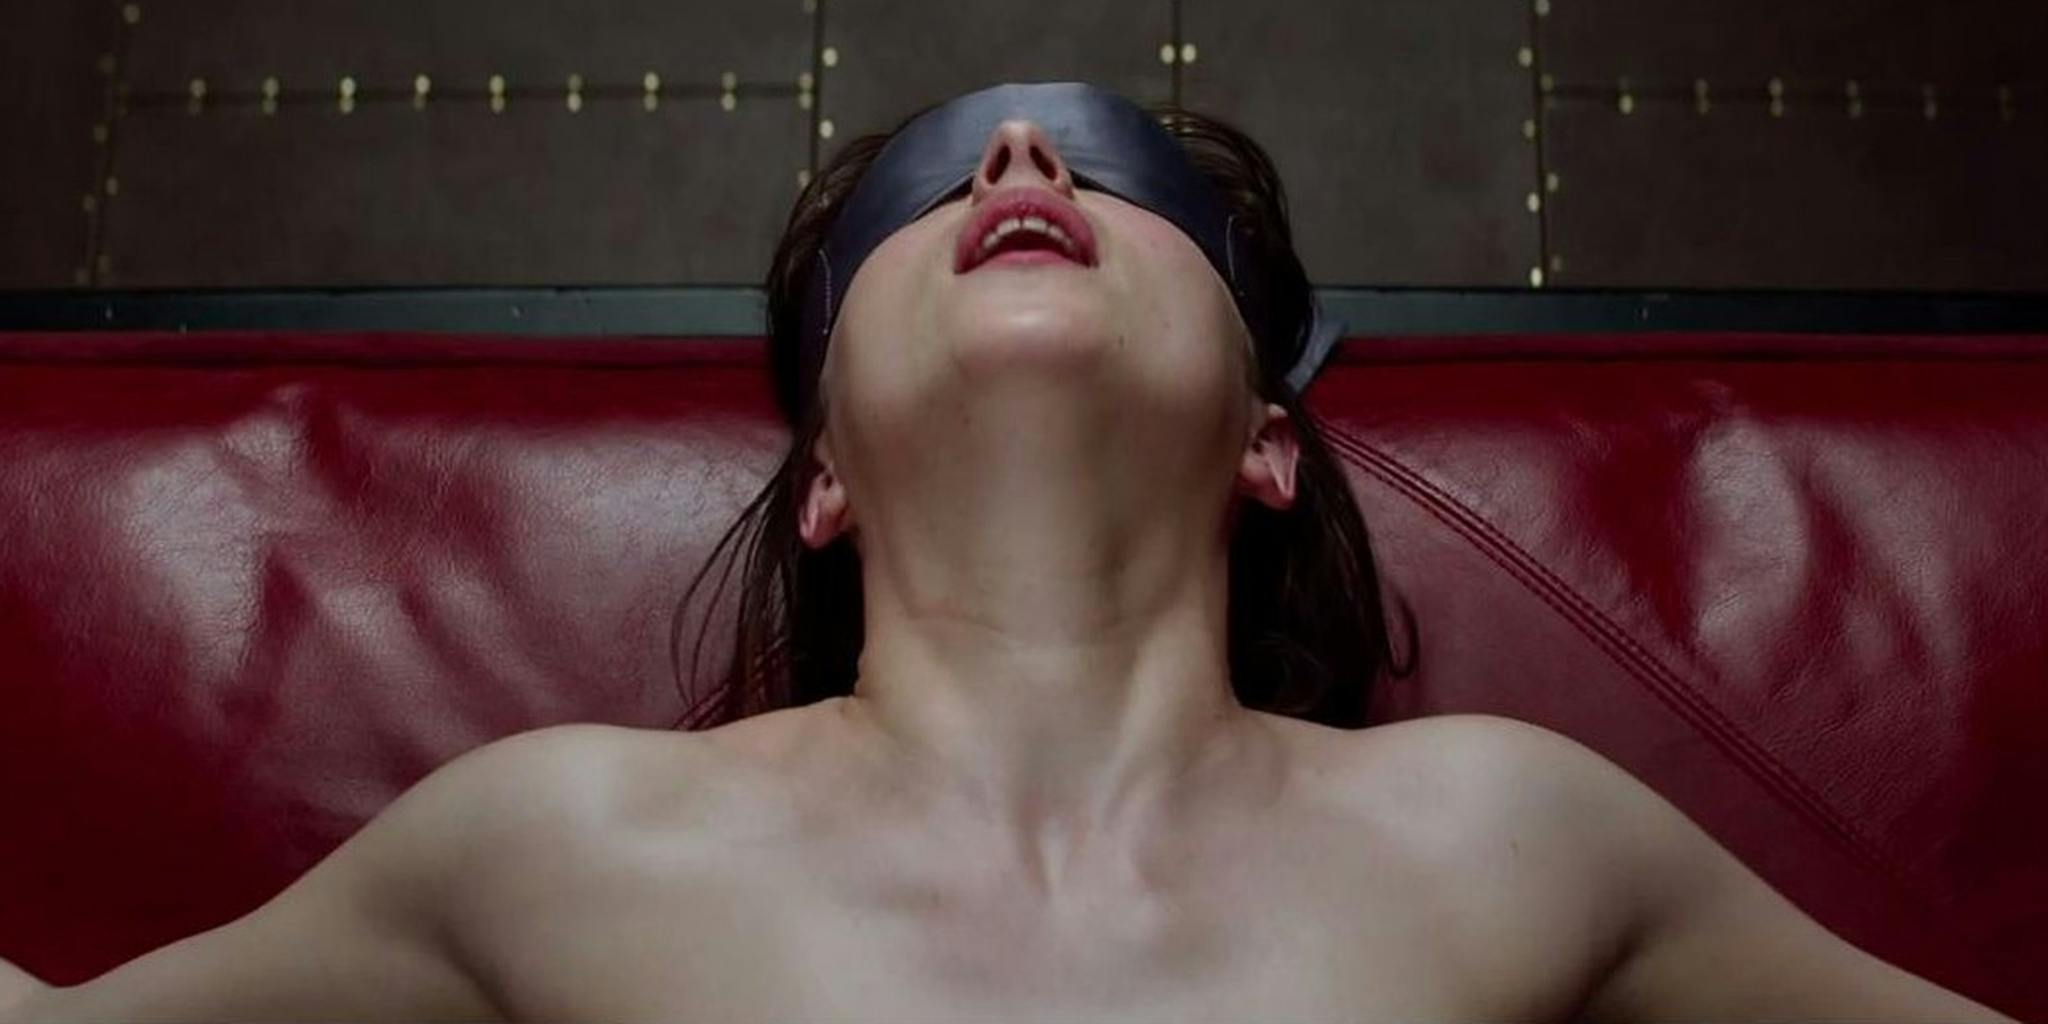 Can the ‘Fifty Shades’ movie make ‘mommy porn’ a public experience?